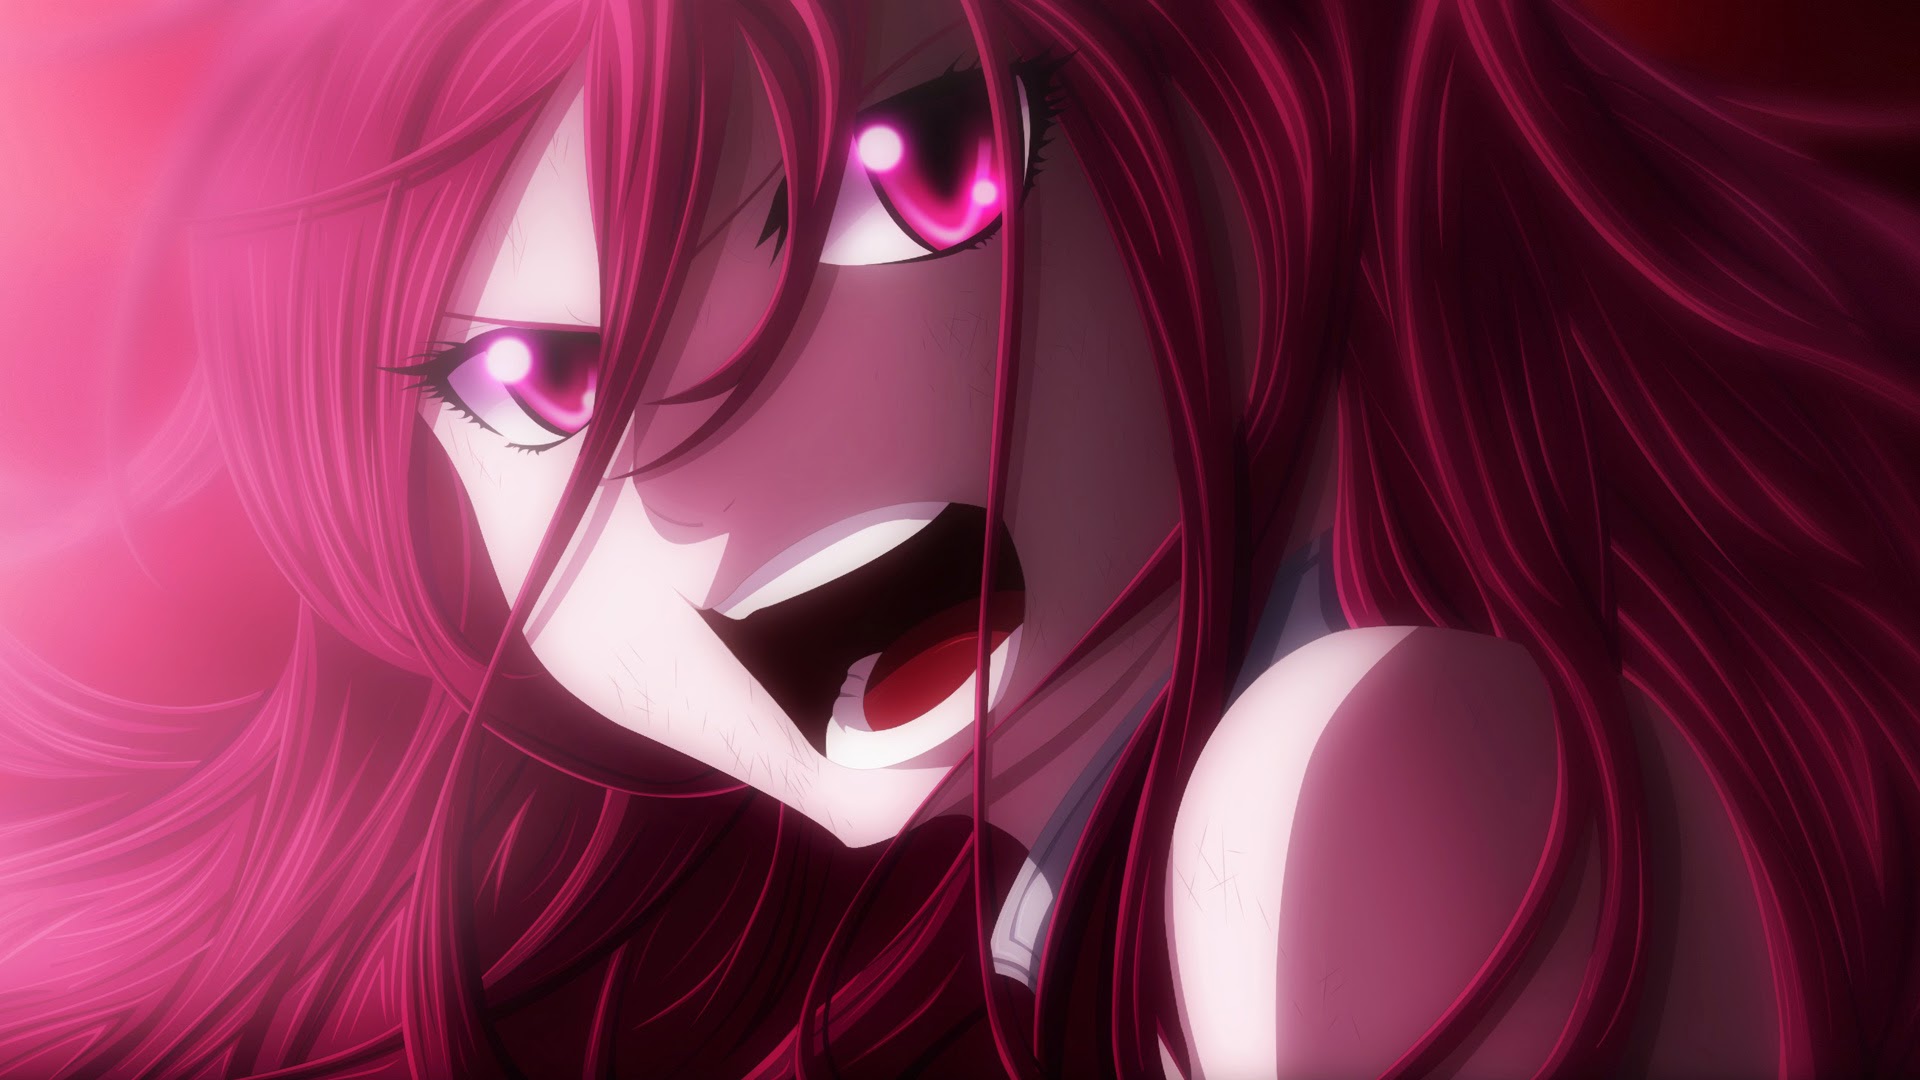 fairy tail erza scarlet anime girl hd wallpaper 1920x1080 4s